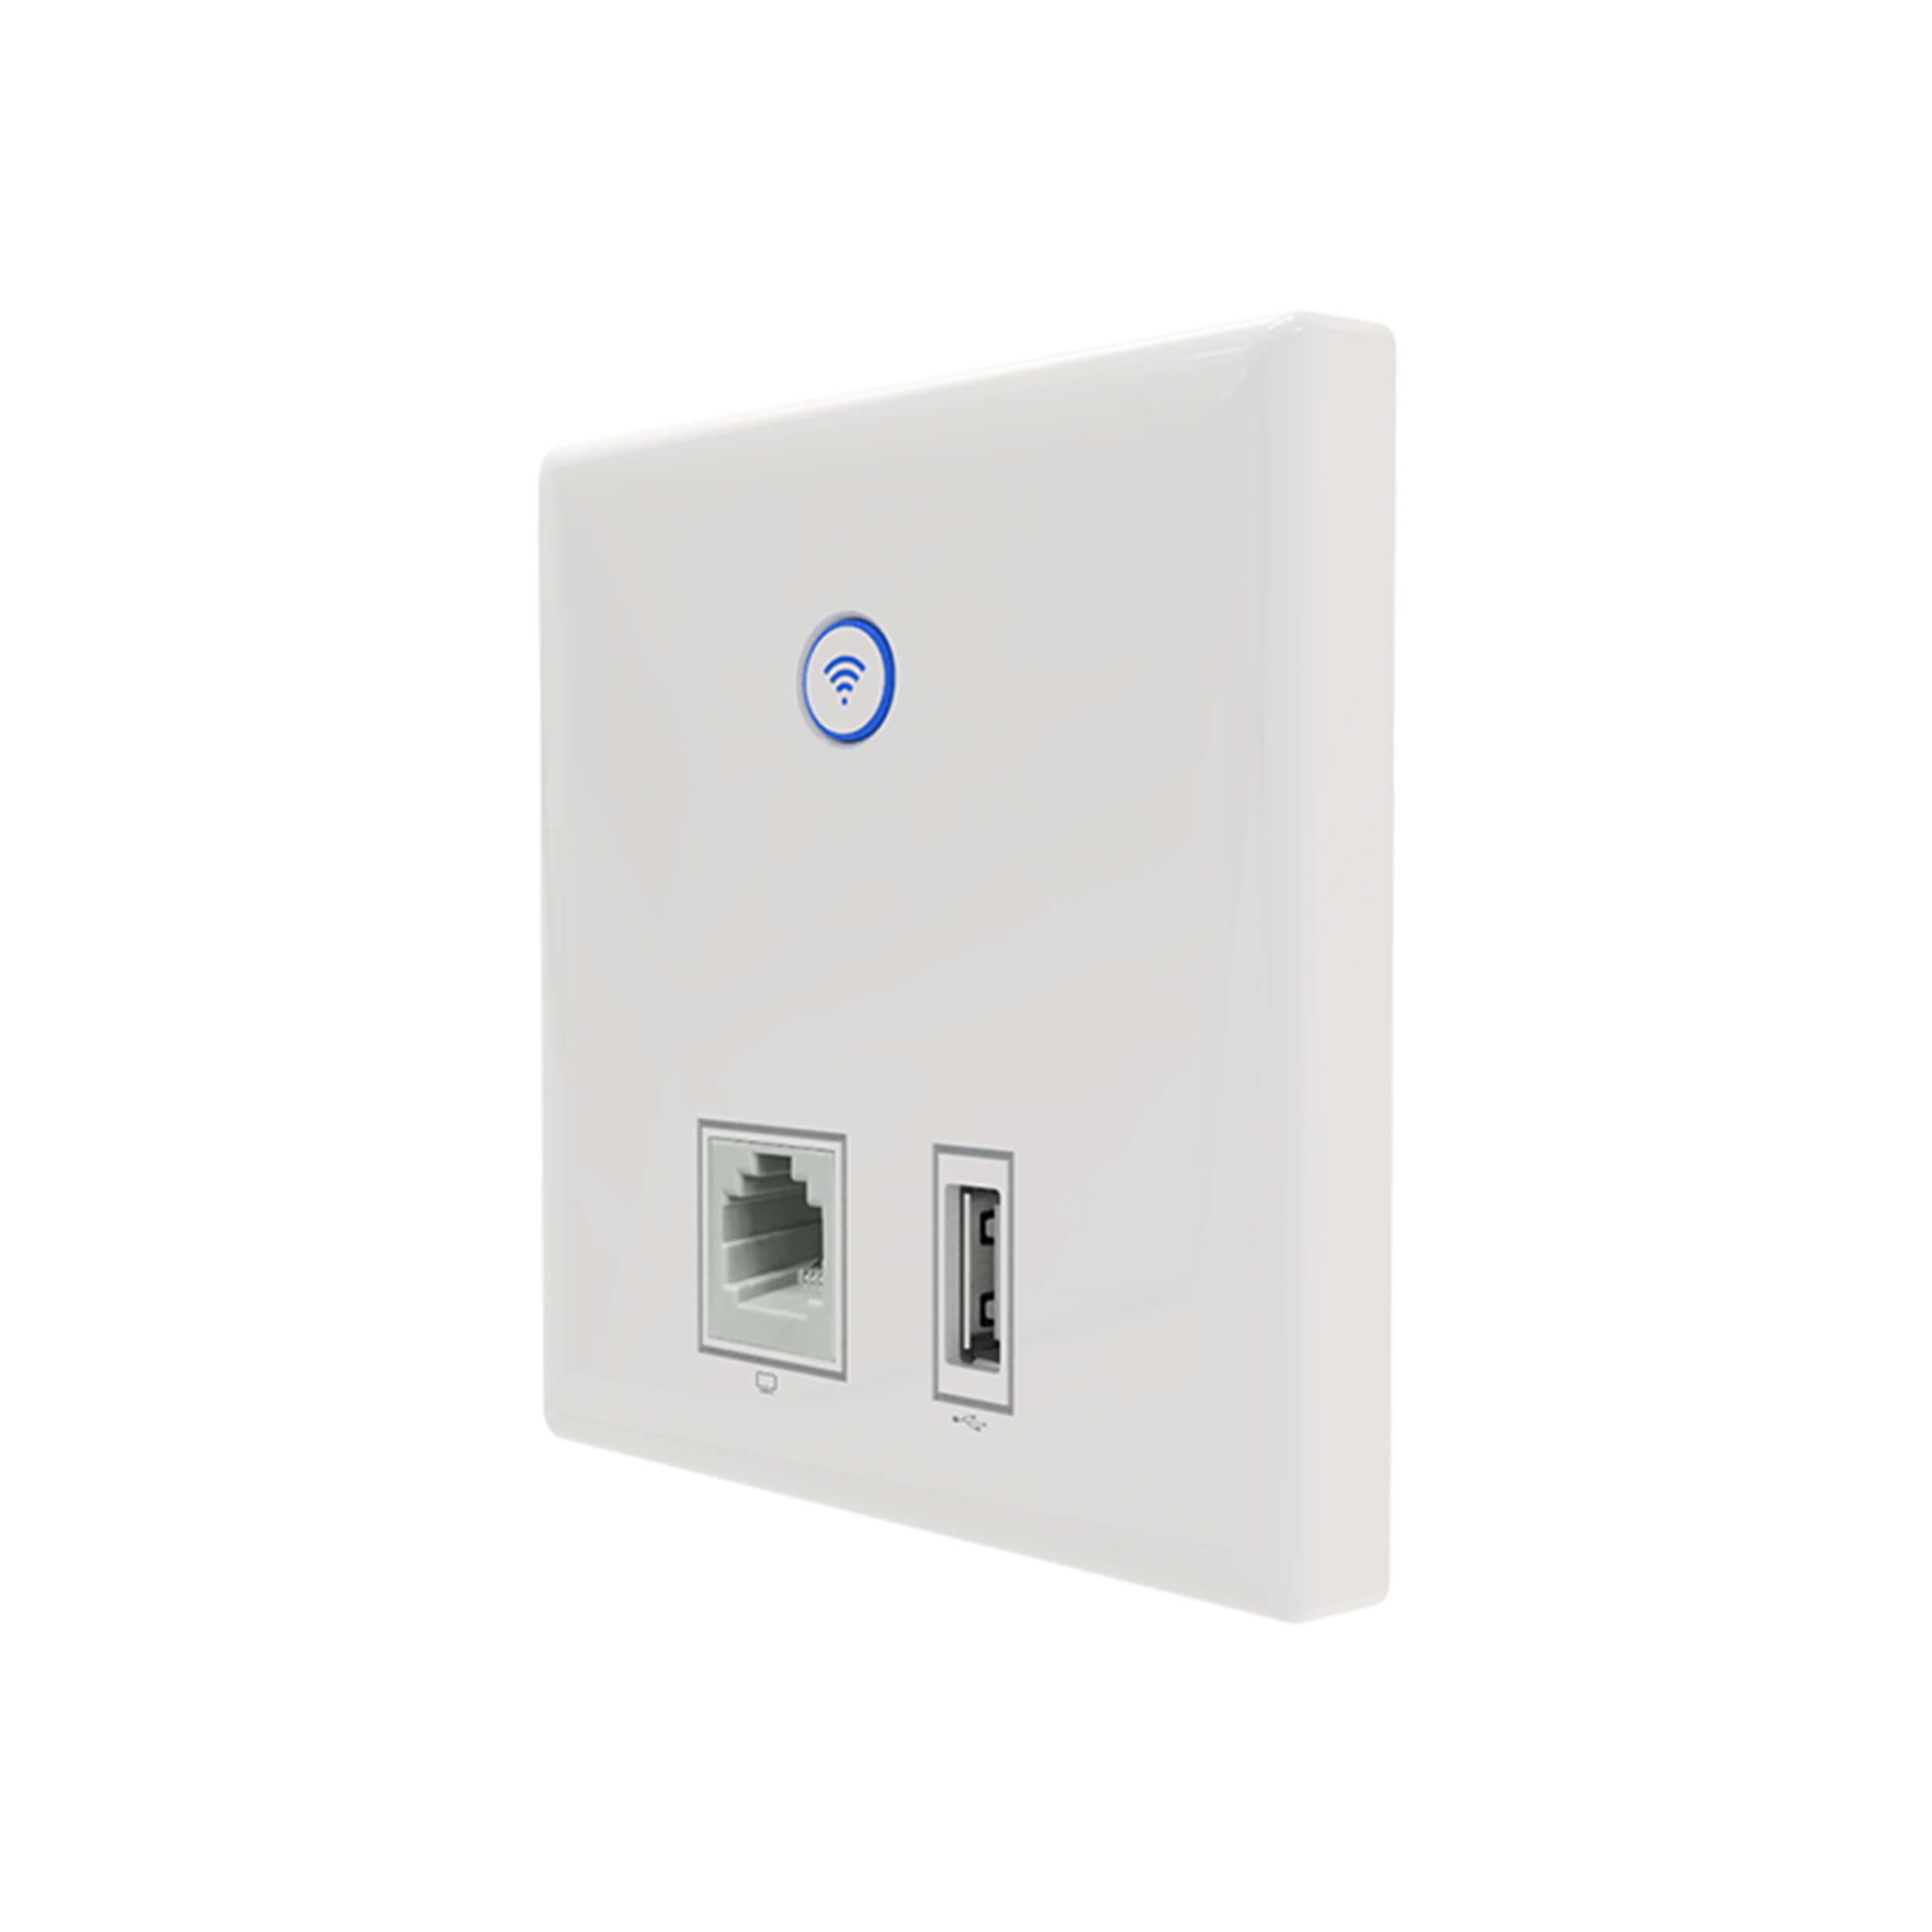 WAP D - Dual Band 750Mbps In-Wall AP with USB Charger